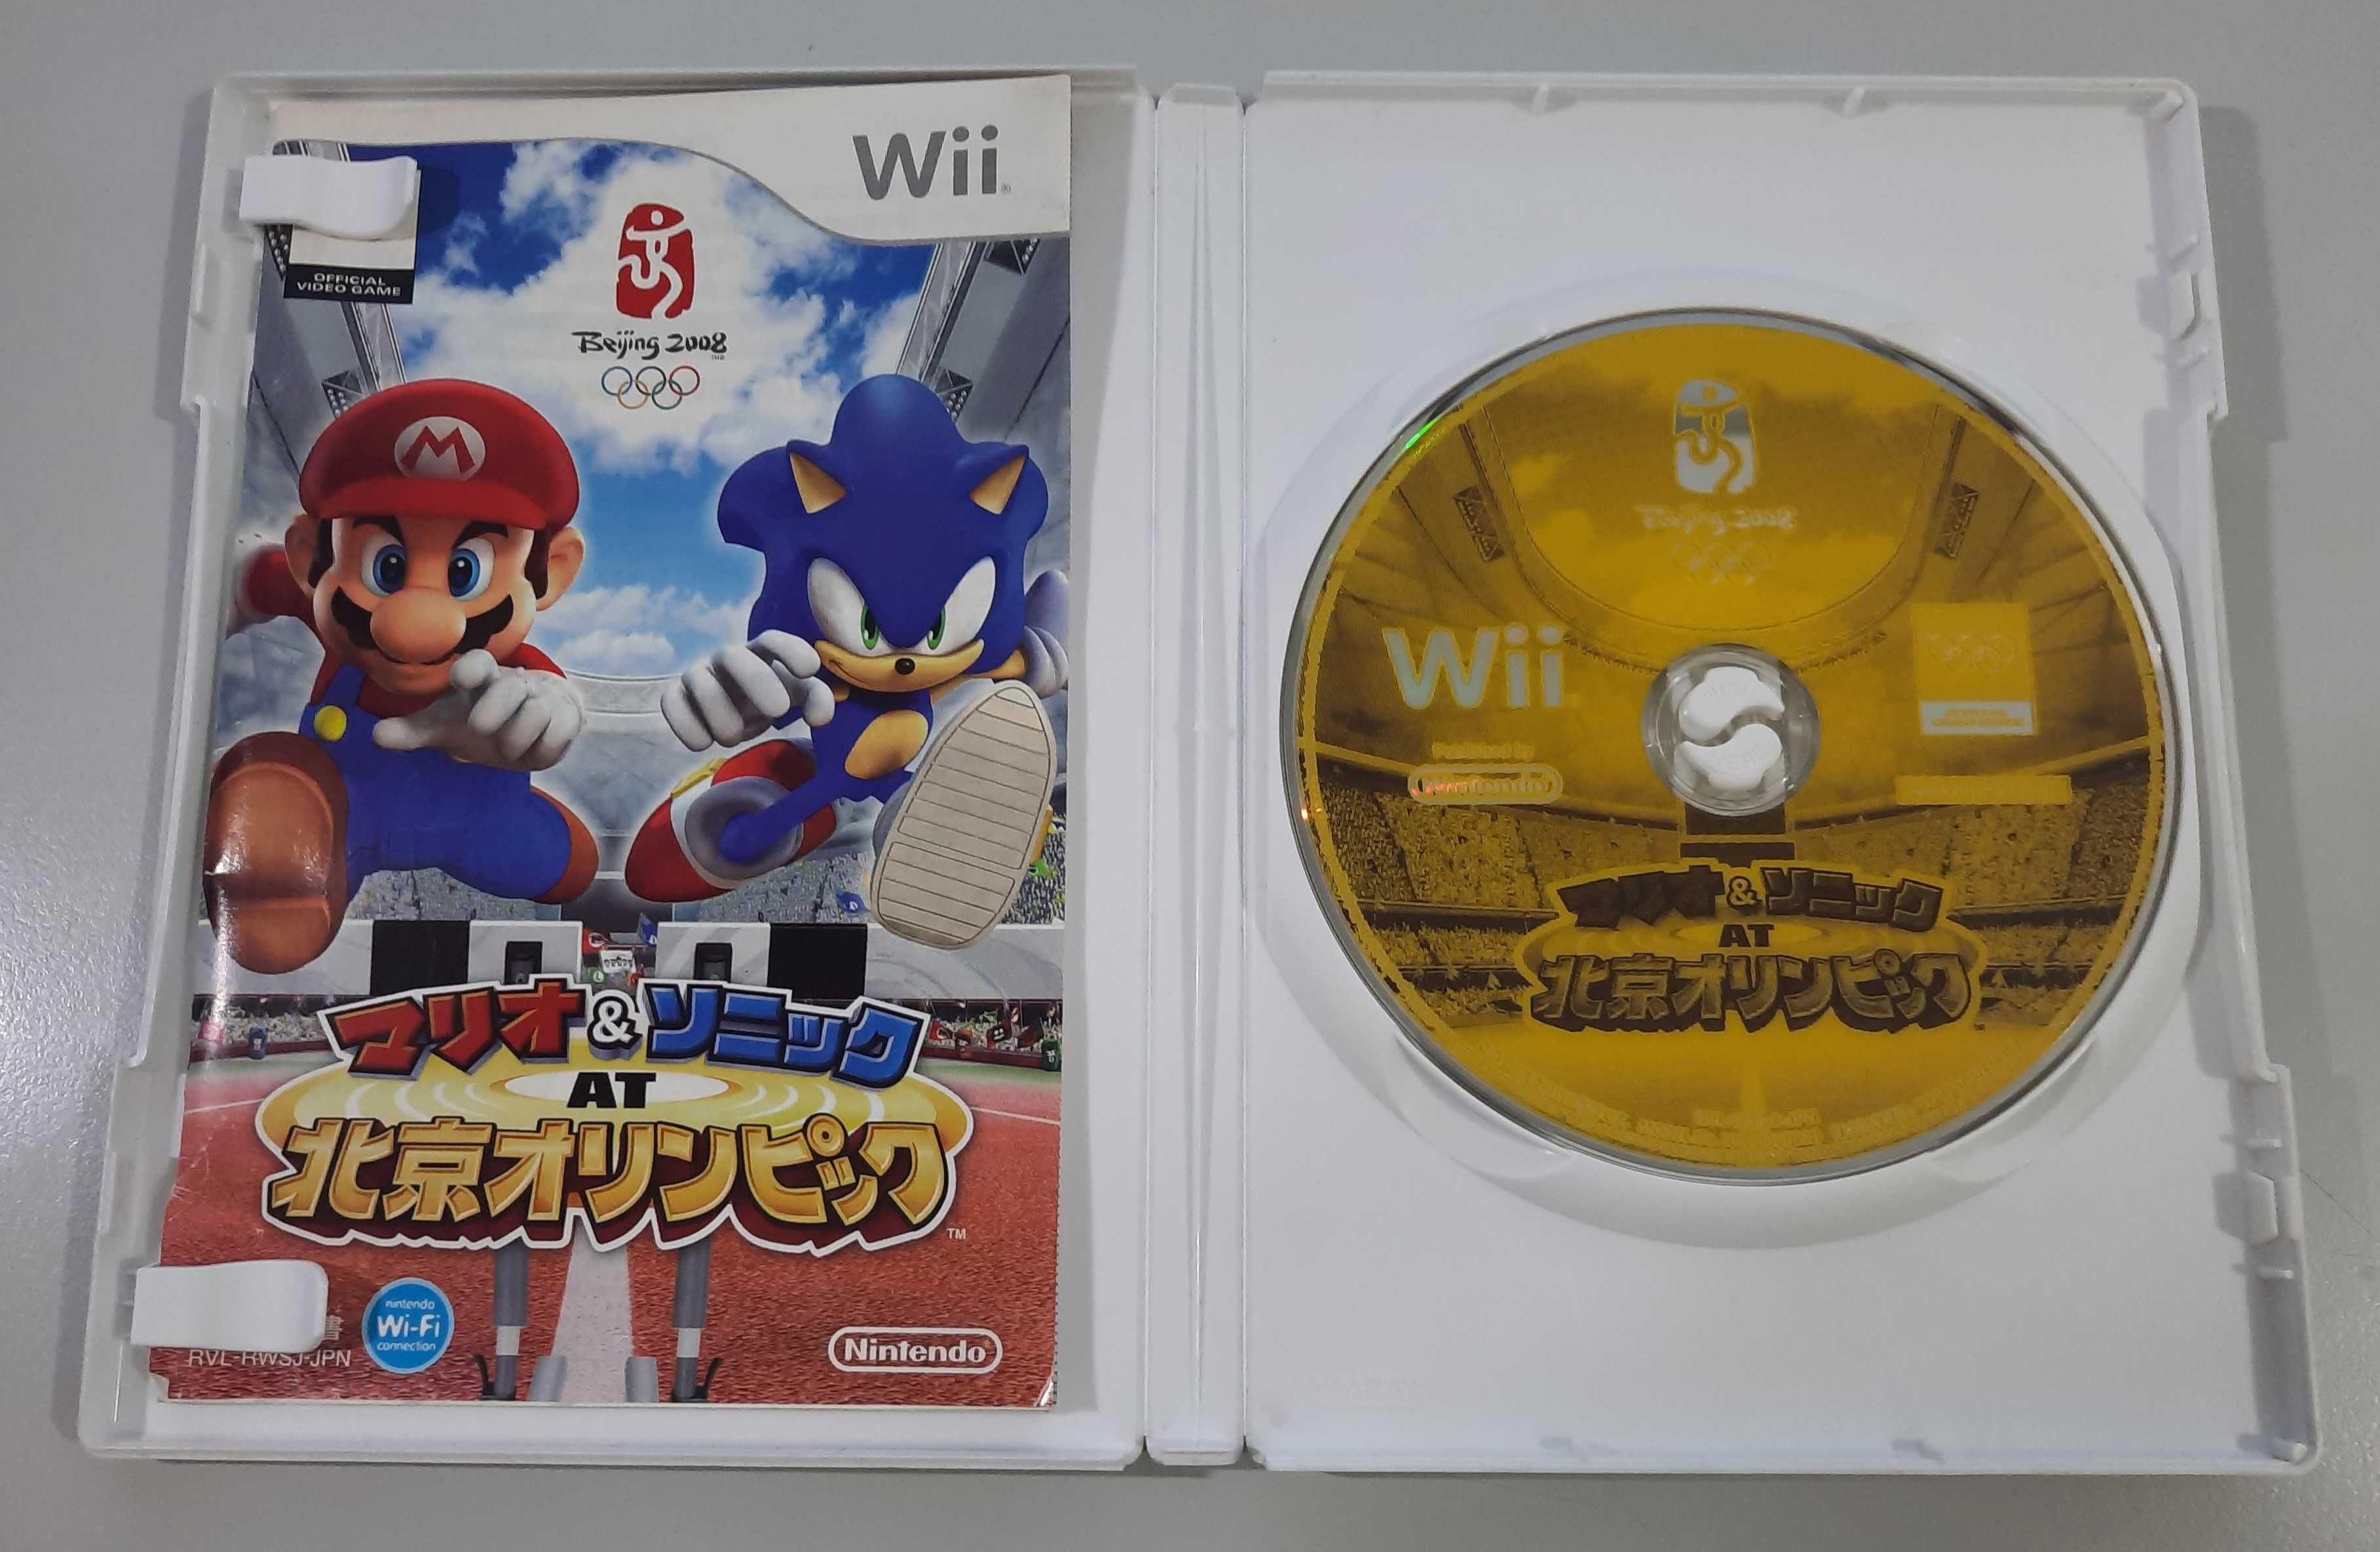 Mario & Sonic at the Olympic Games Beijing 2007 / Wii [NTSC-J]